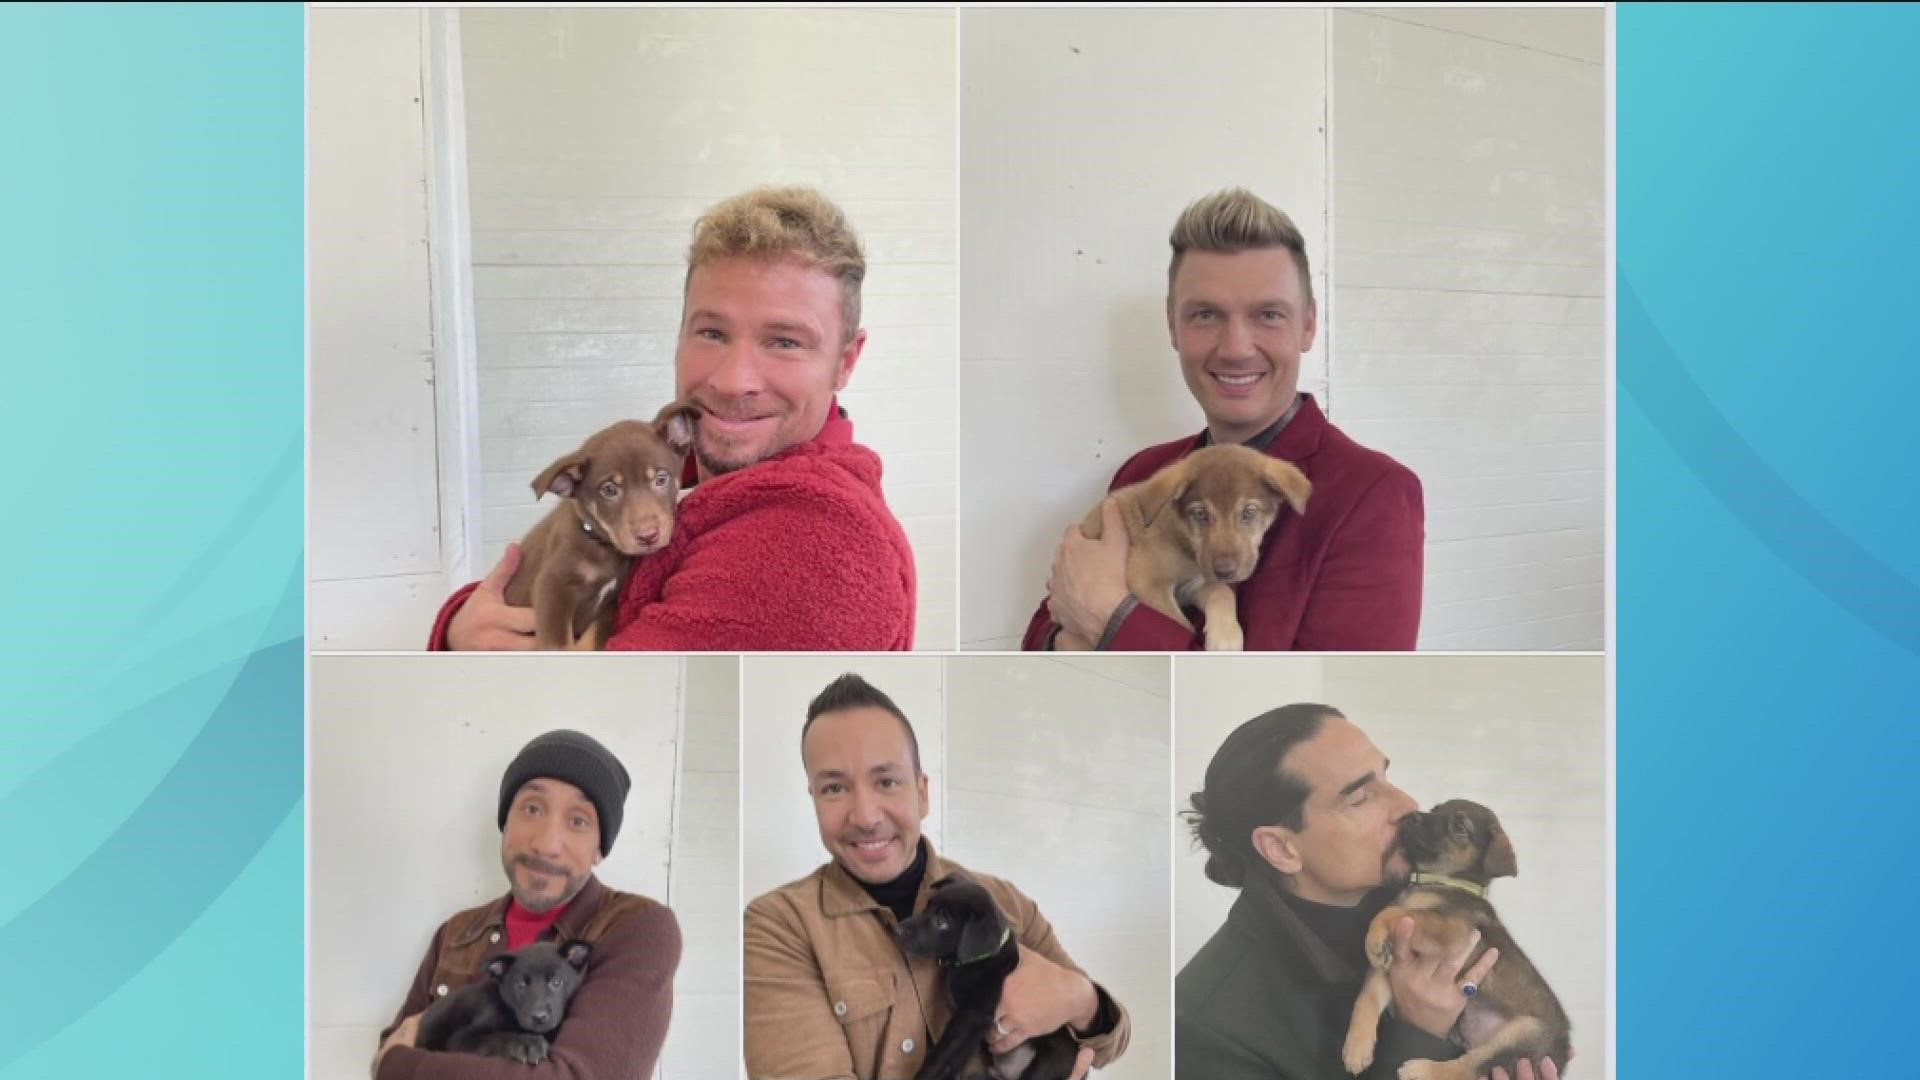 While on a recent tour stop, the band visited the "Nashville Humane Association, after learning that a litter of puppies had just been born and named after them.